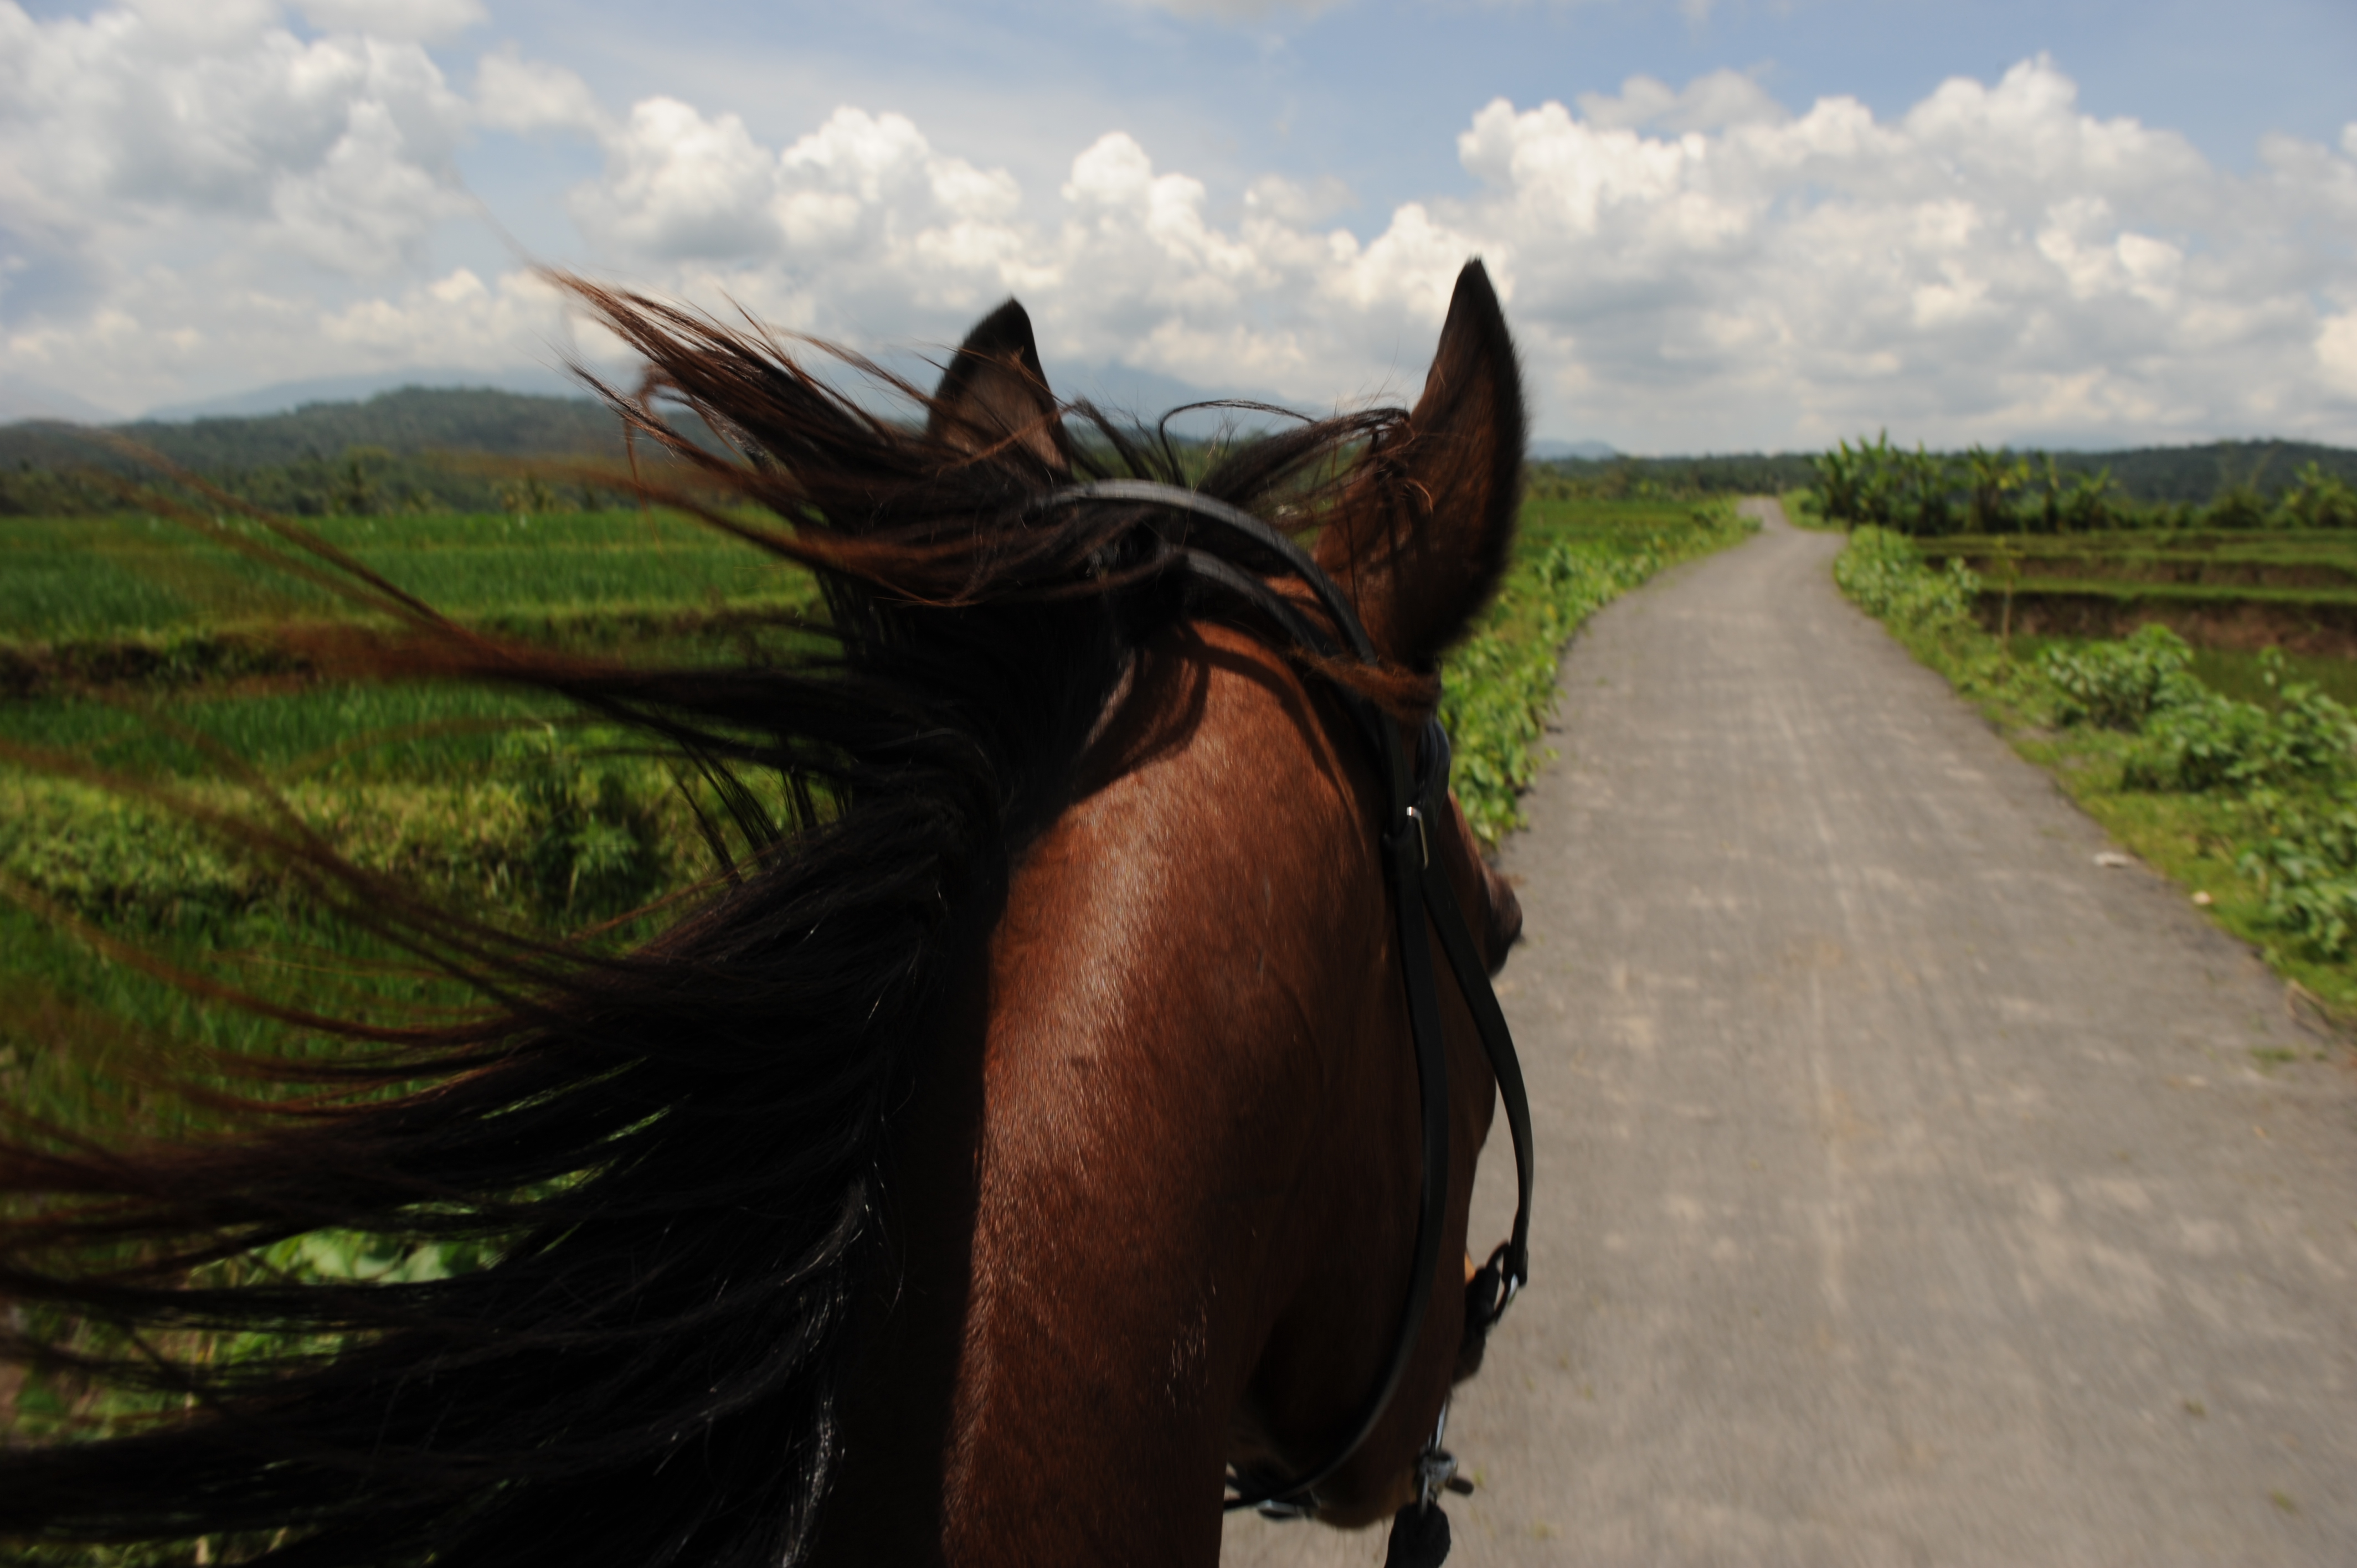 Exciting trail rides on horseback